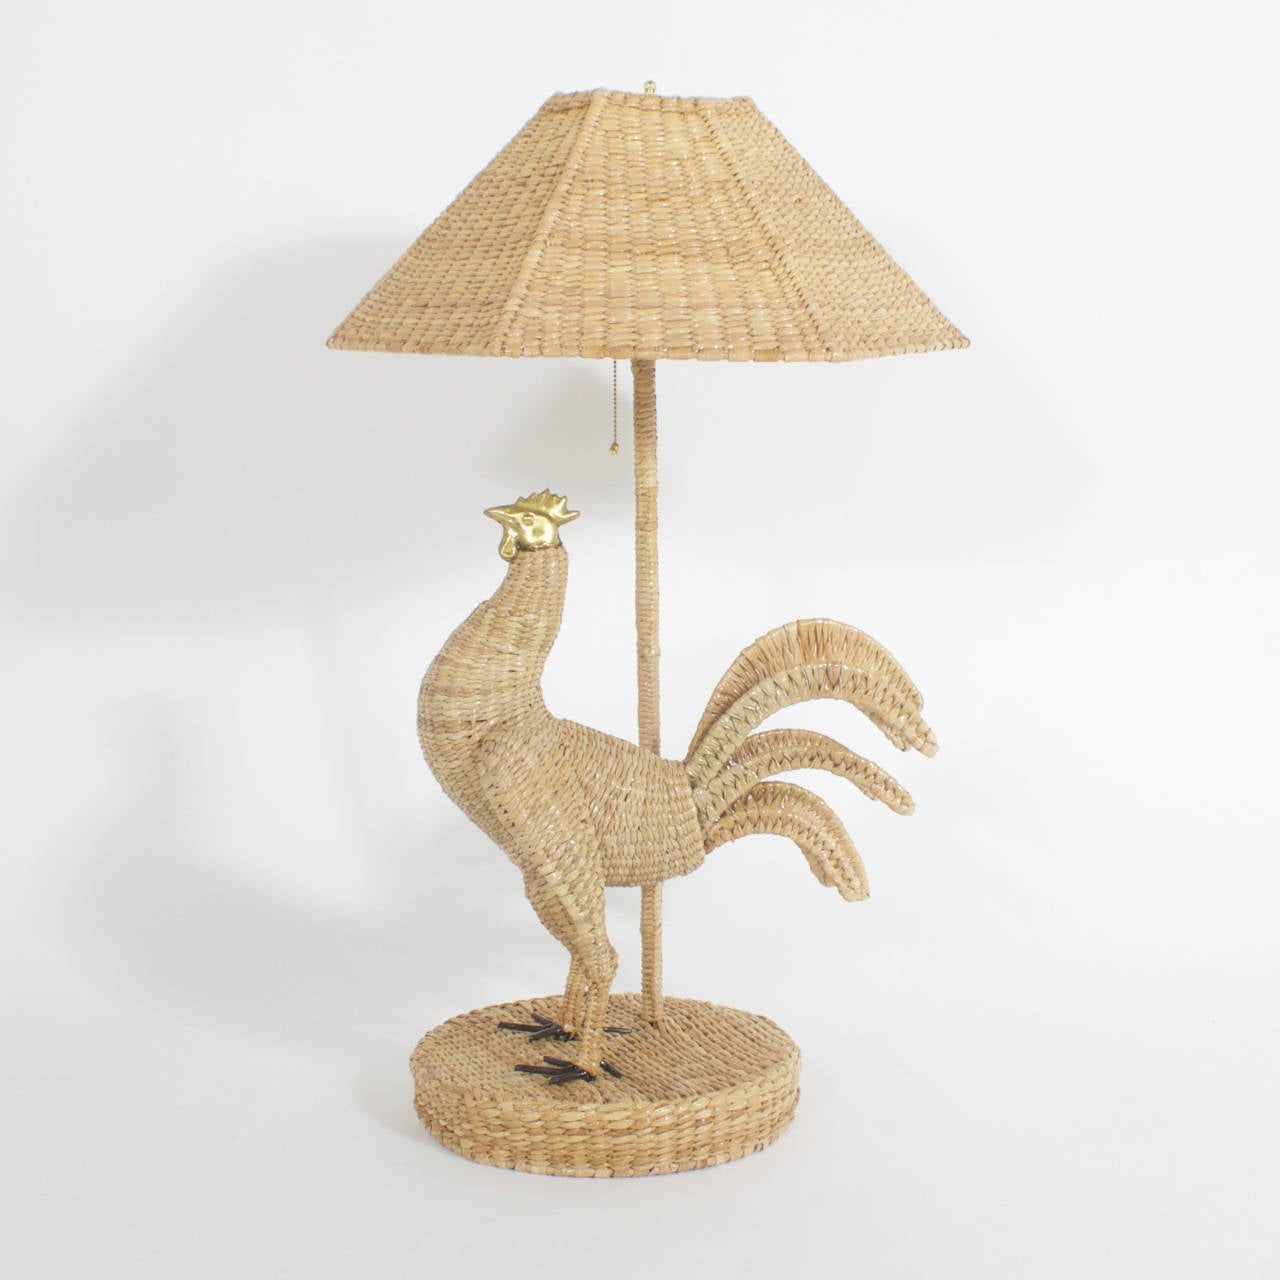 Pair of whimsical Mario Torres Rooster table lamps constructed of a metal frame tightly wrapped in wicker or reed. These lamps feature brass heads with metal talons and your choice of wicker or linen shades. These birds are strutting their stuff